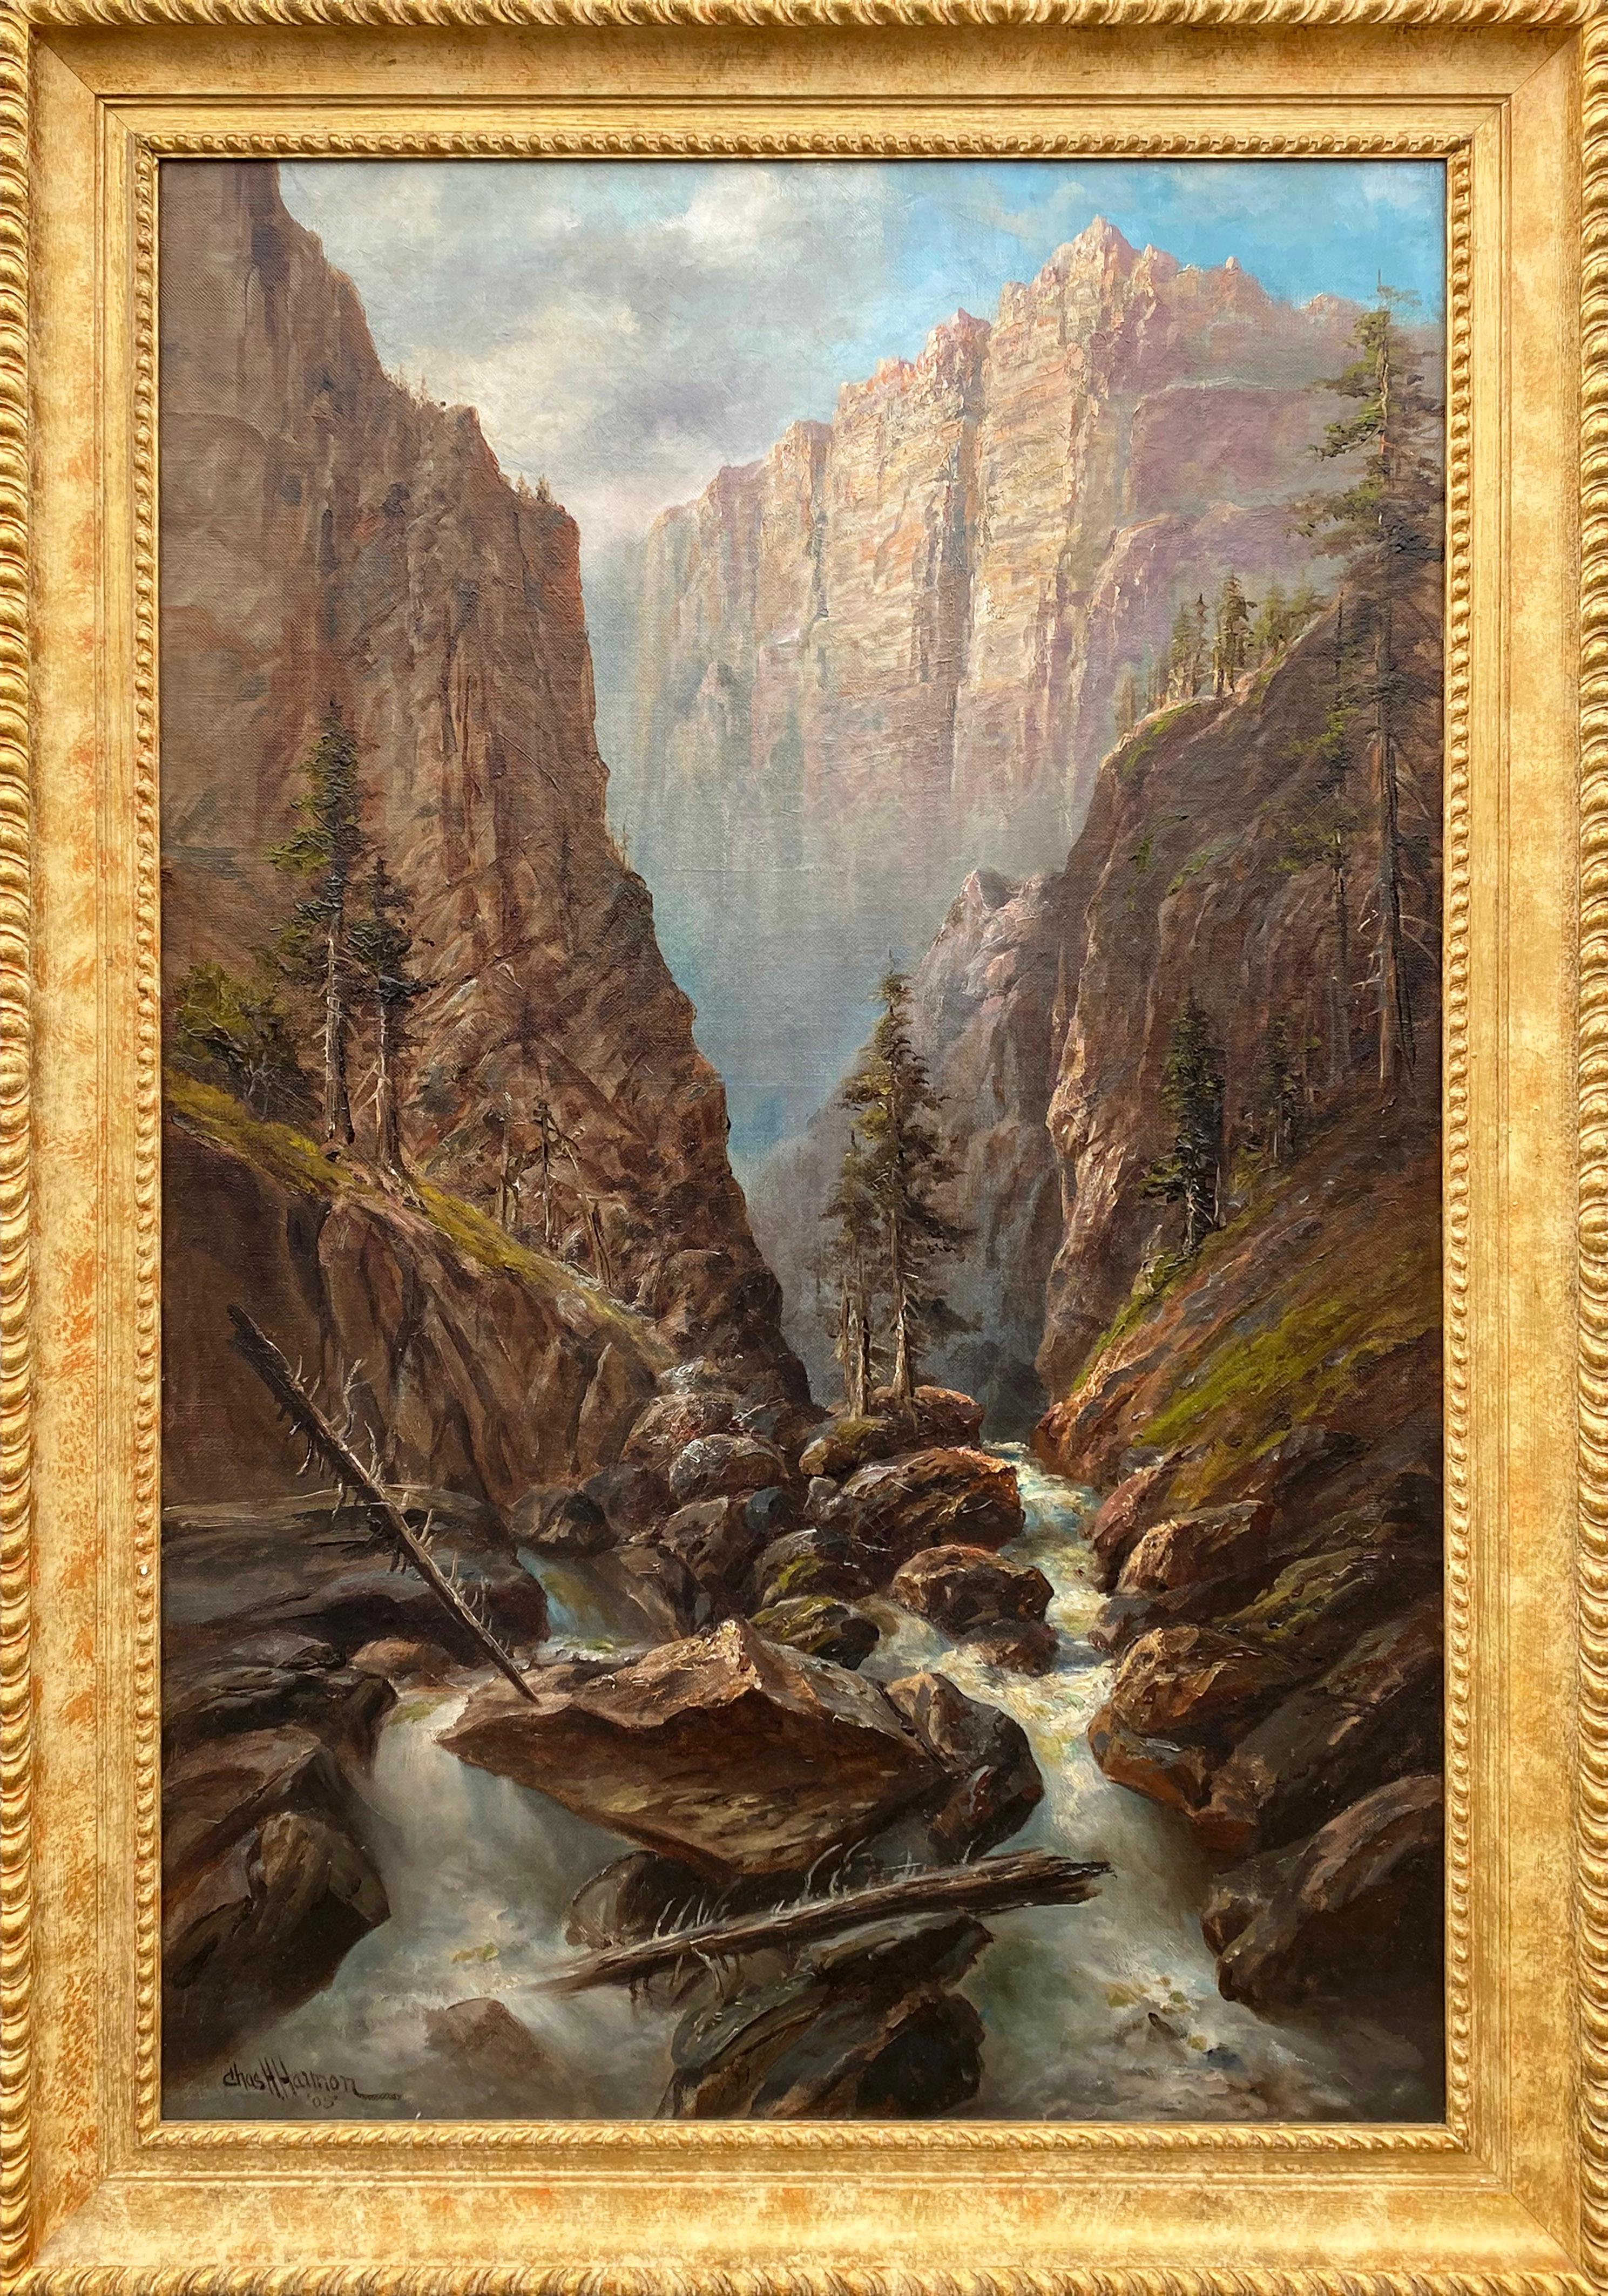 Majestic Waters - Painting by Charles Henry Harmon 